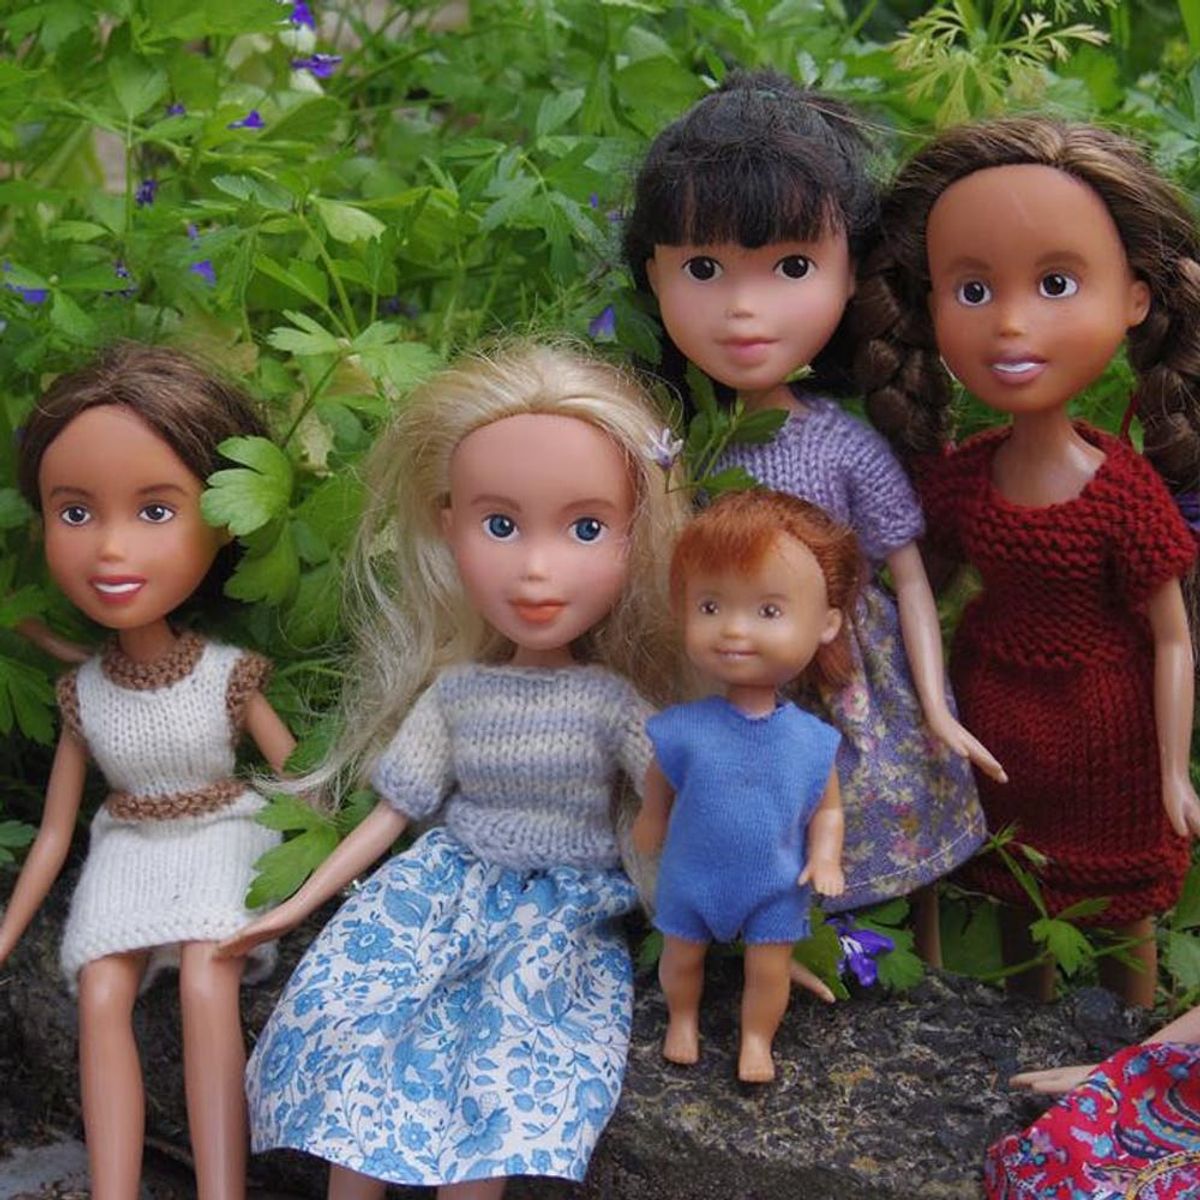 This Artist Repaints Bratz Dolls to Look More Natural